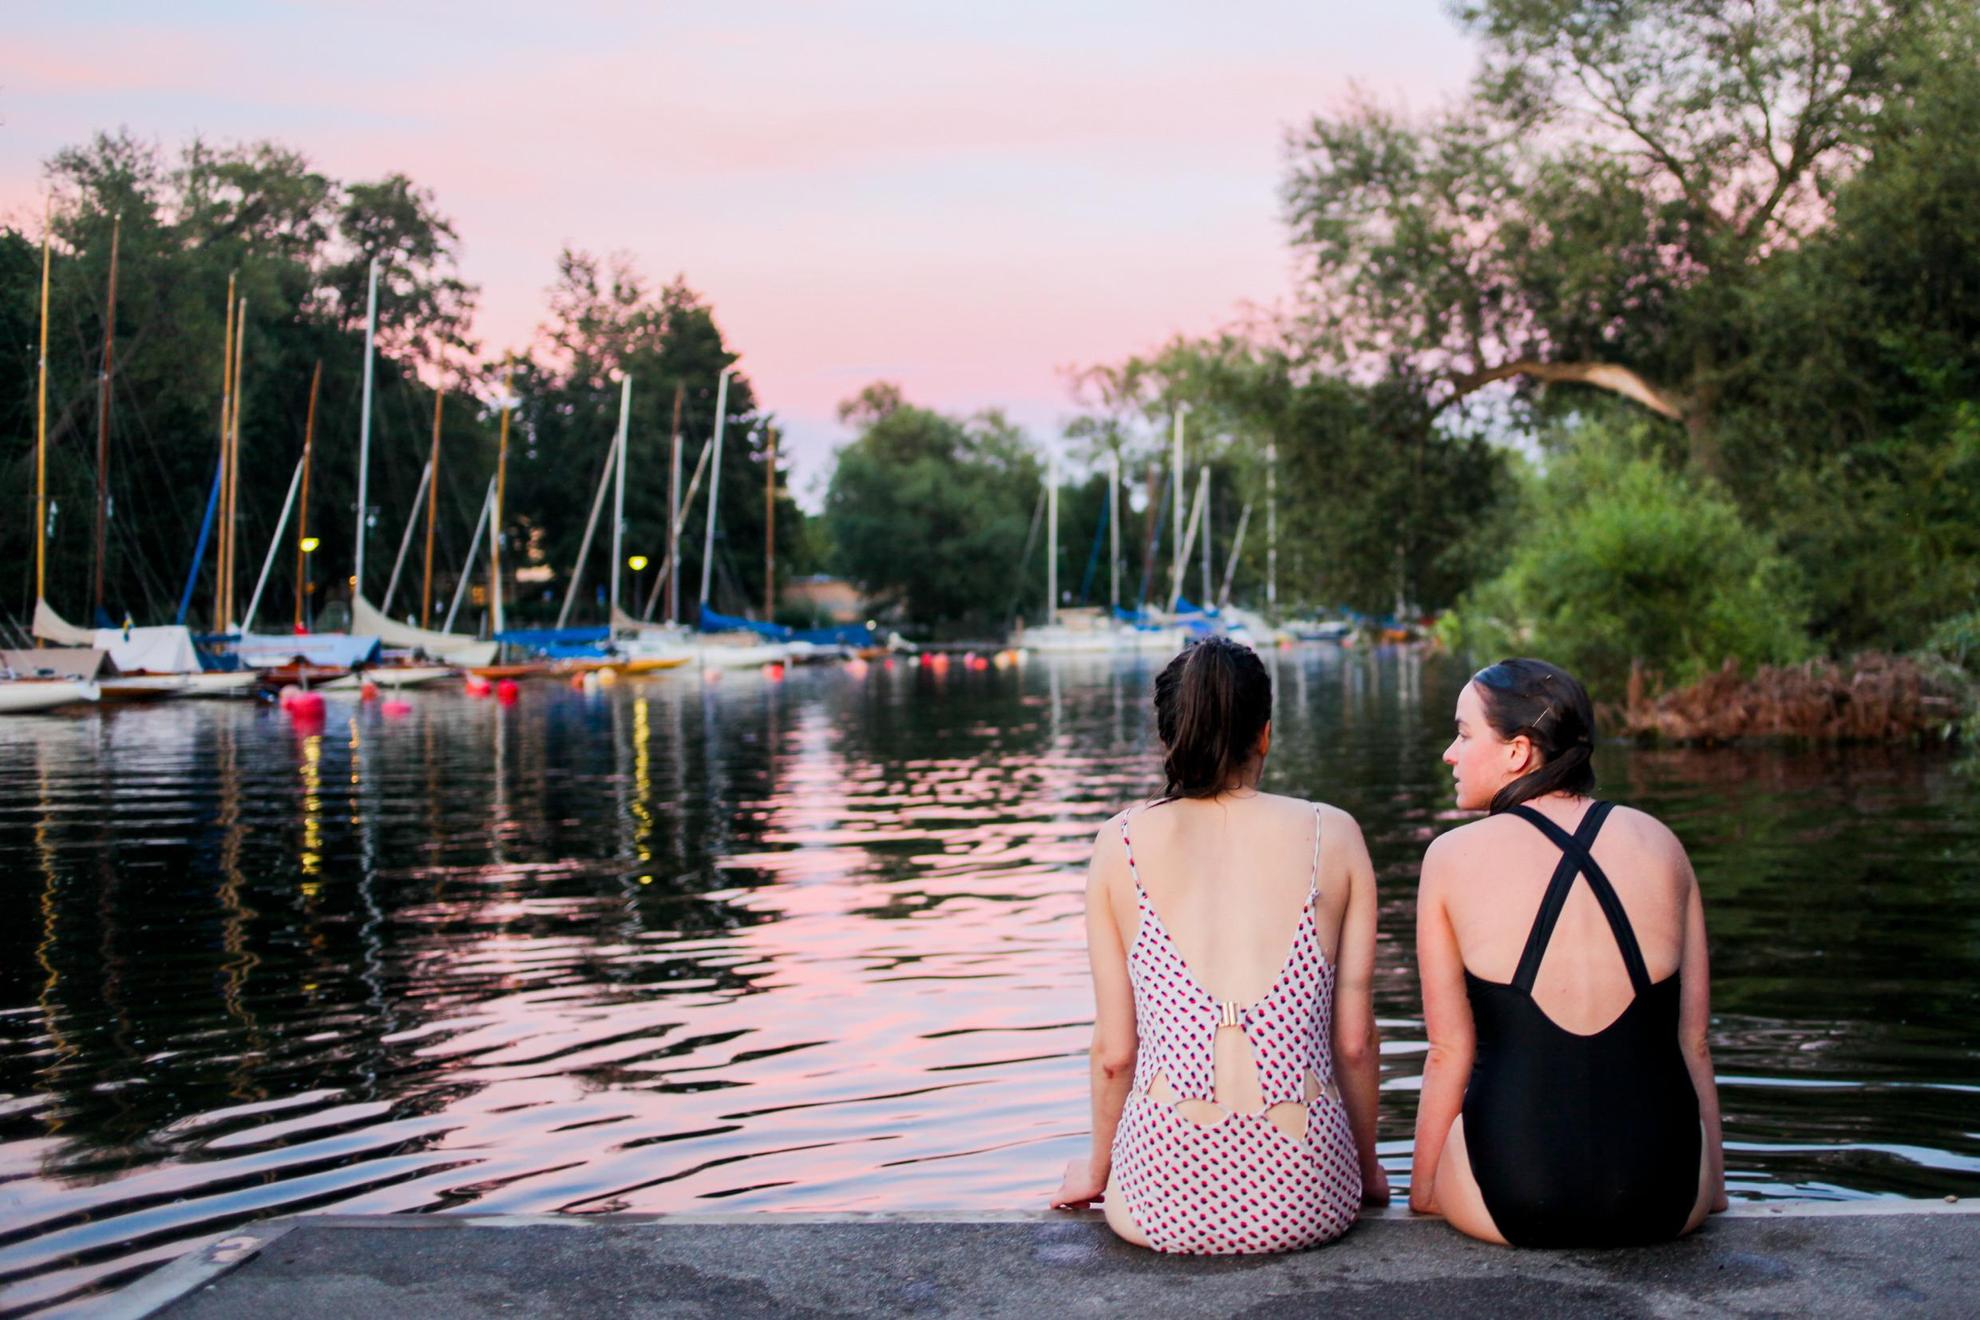 Two girls are sitting on a pier across from moored private boats.